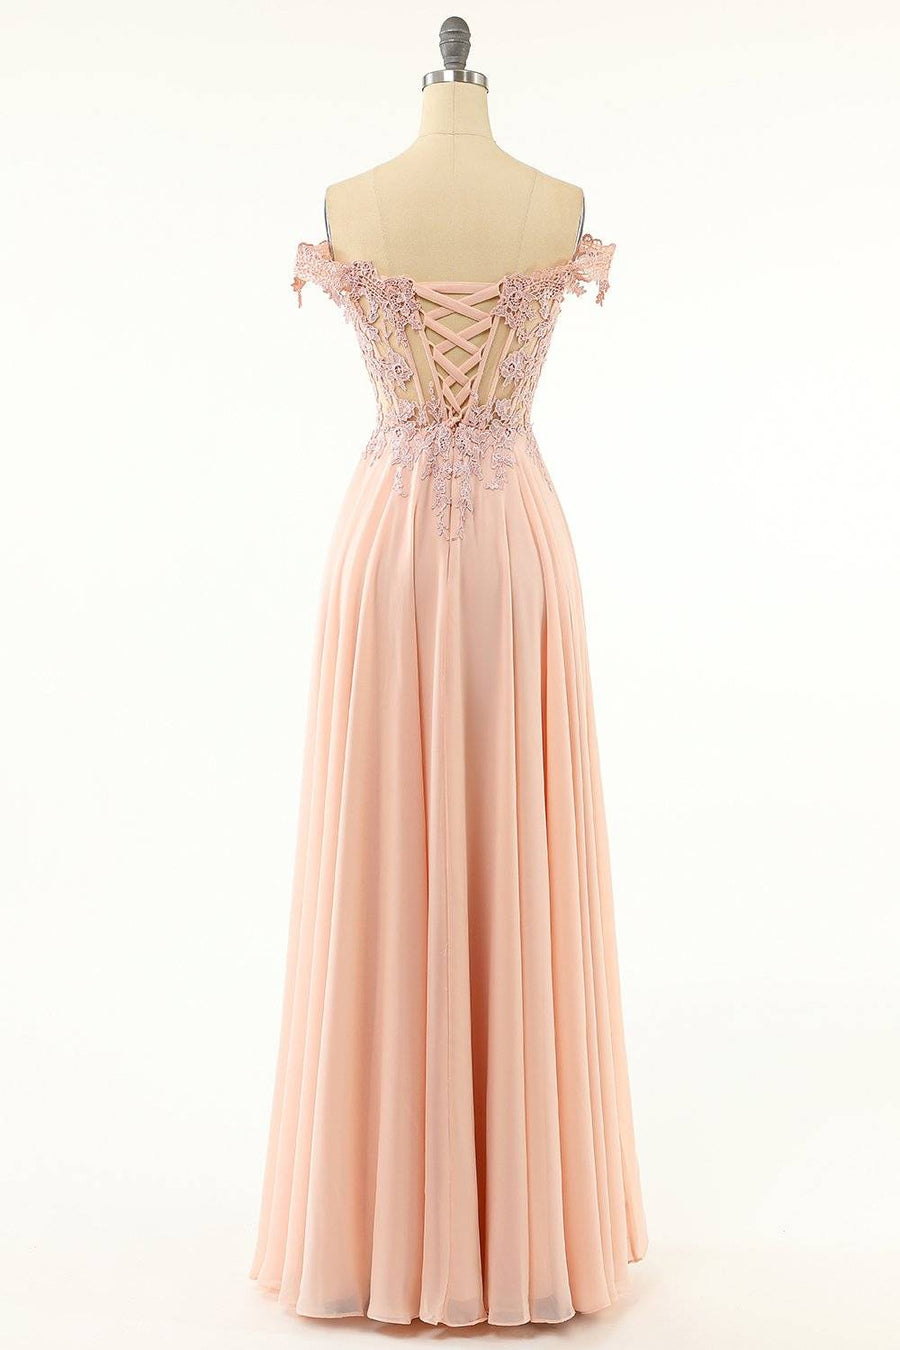 Blushing Pink A-line Off-Shoulder Chiffon Applique Lace-Up Long Prom Dress